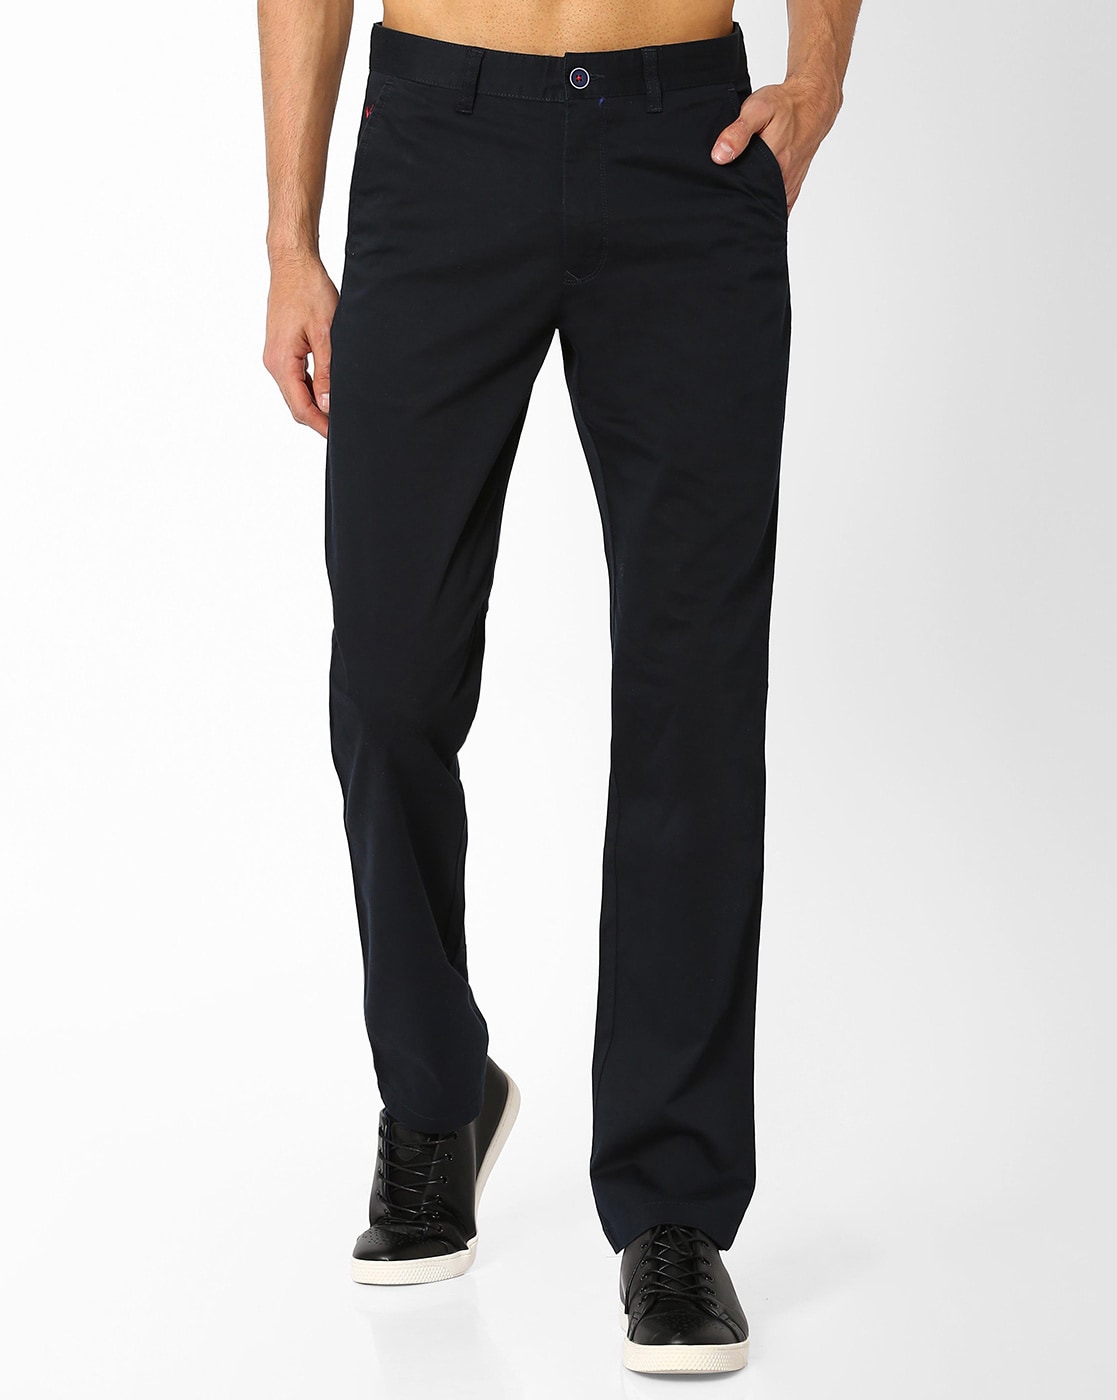 Buy Blue Trousers  Pants for Men by Wills Lifestyle Online  Ajiocom